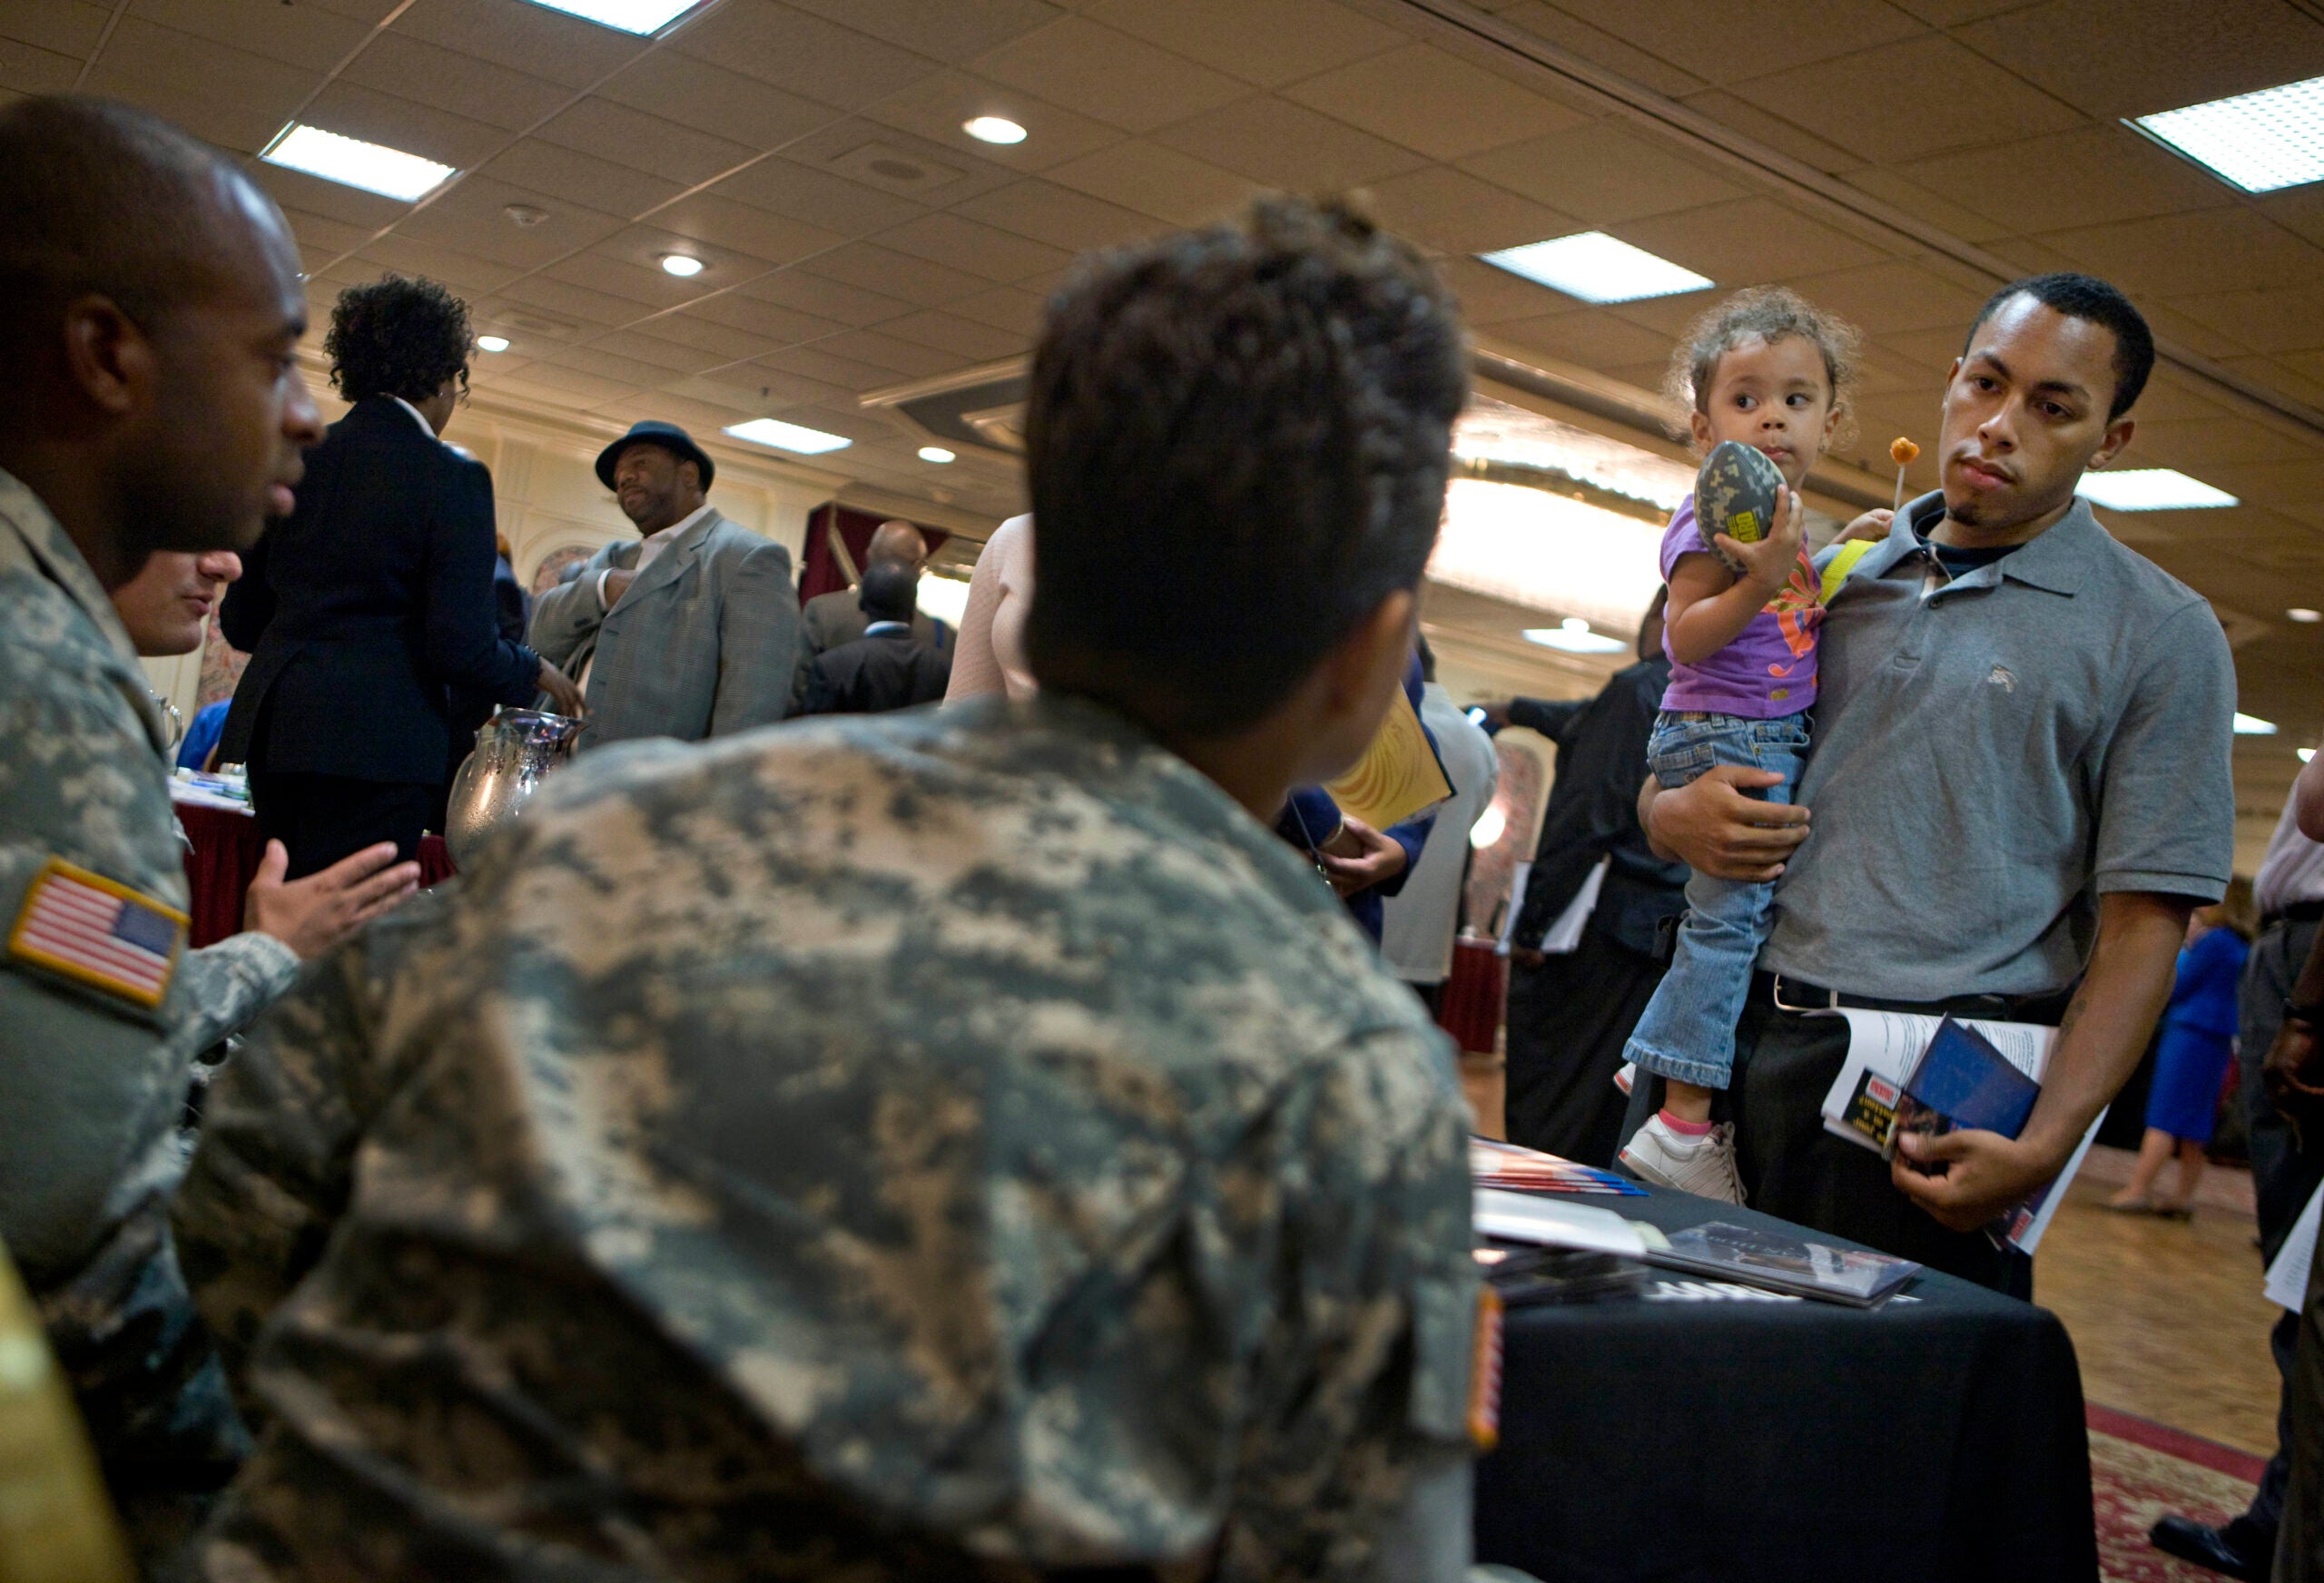 In this Aug. 24, 2010 photograph, Aaron Harvey, of Elizabeth, N.J., holds his daughter Grace, 2, while talking to U.S. Army National Guard recruiters about enlisting at a career fair in Newark, N.J. (AP Photo/David Goldman)